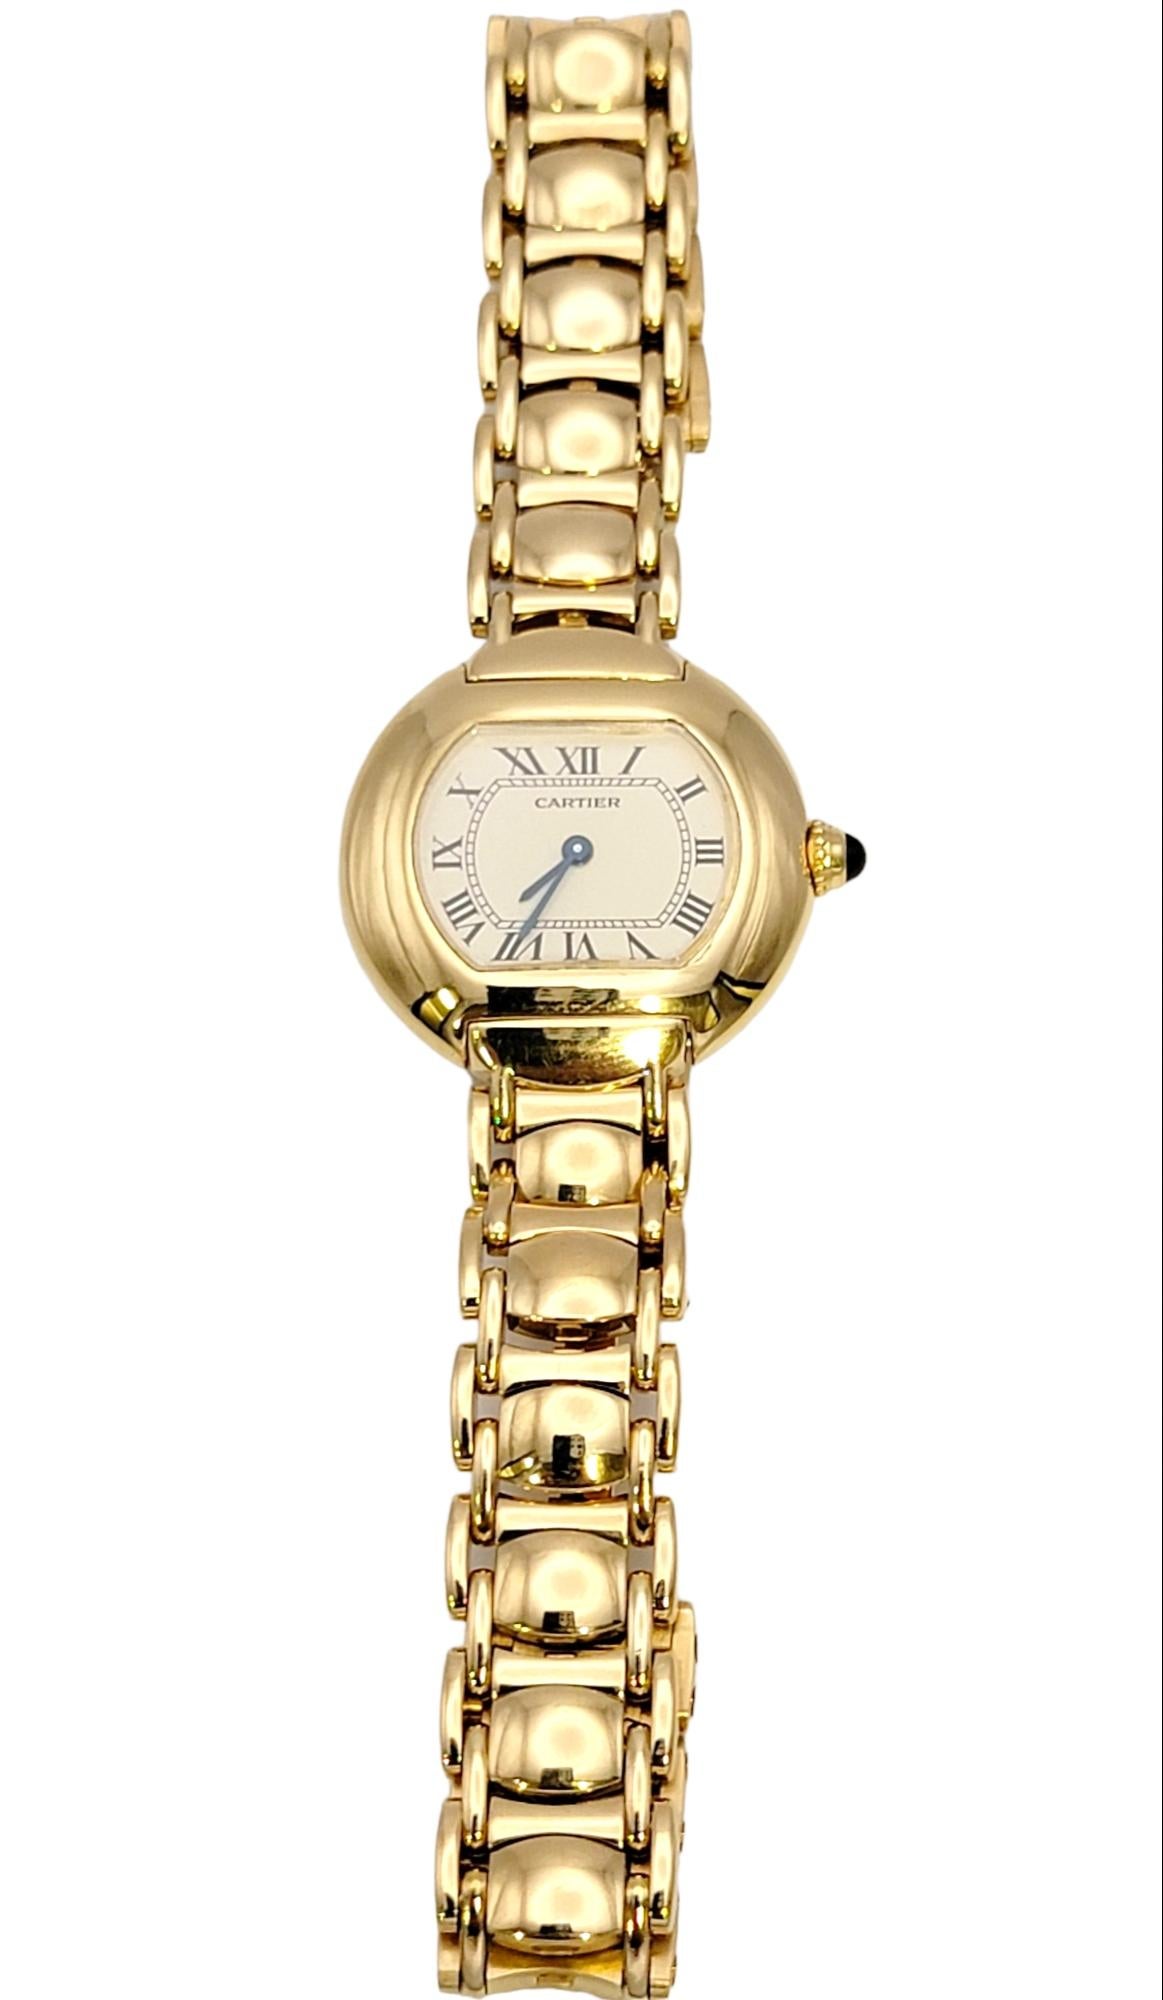 Presenting a timeless treasure that transcends eras- a vintage ladies 18 karat yellow gold Cartier Ellipse watch. This exceptional timepiece from the esteemed Cartier brand is a testament to their unrivaled craftsmanship and enduring